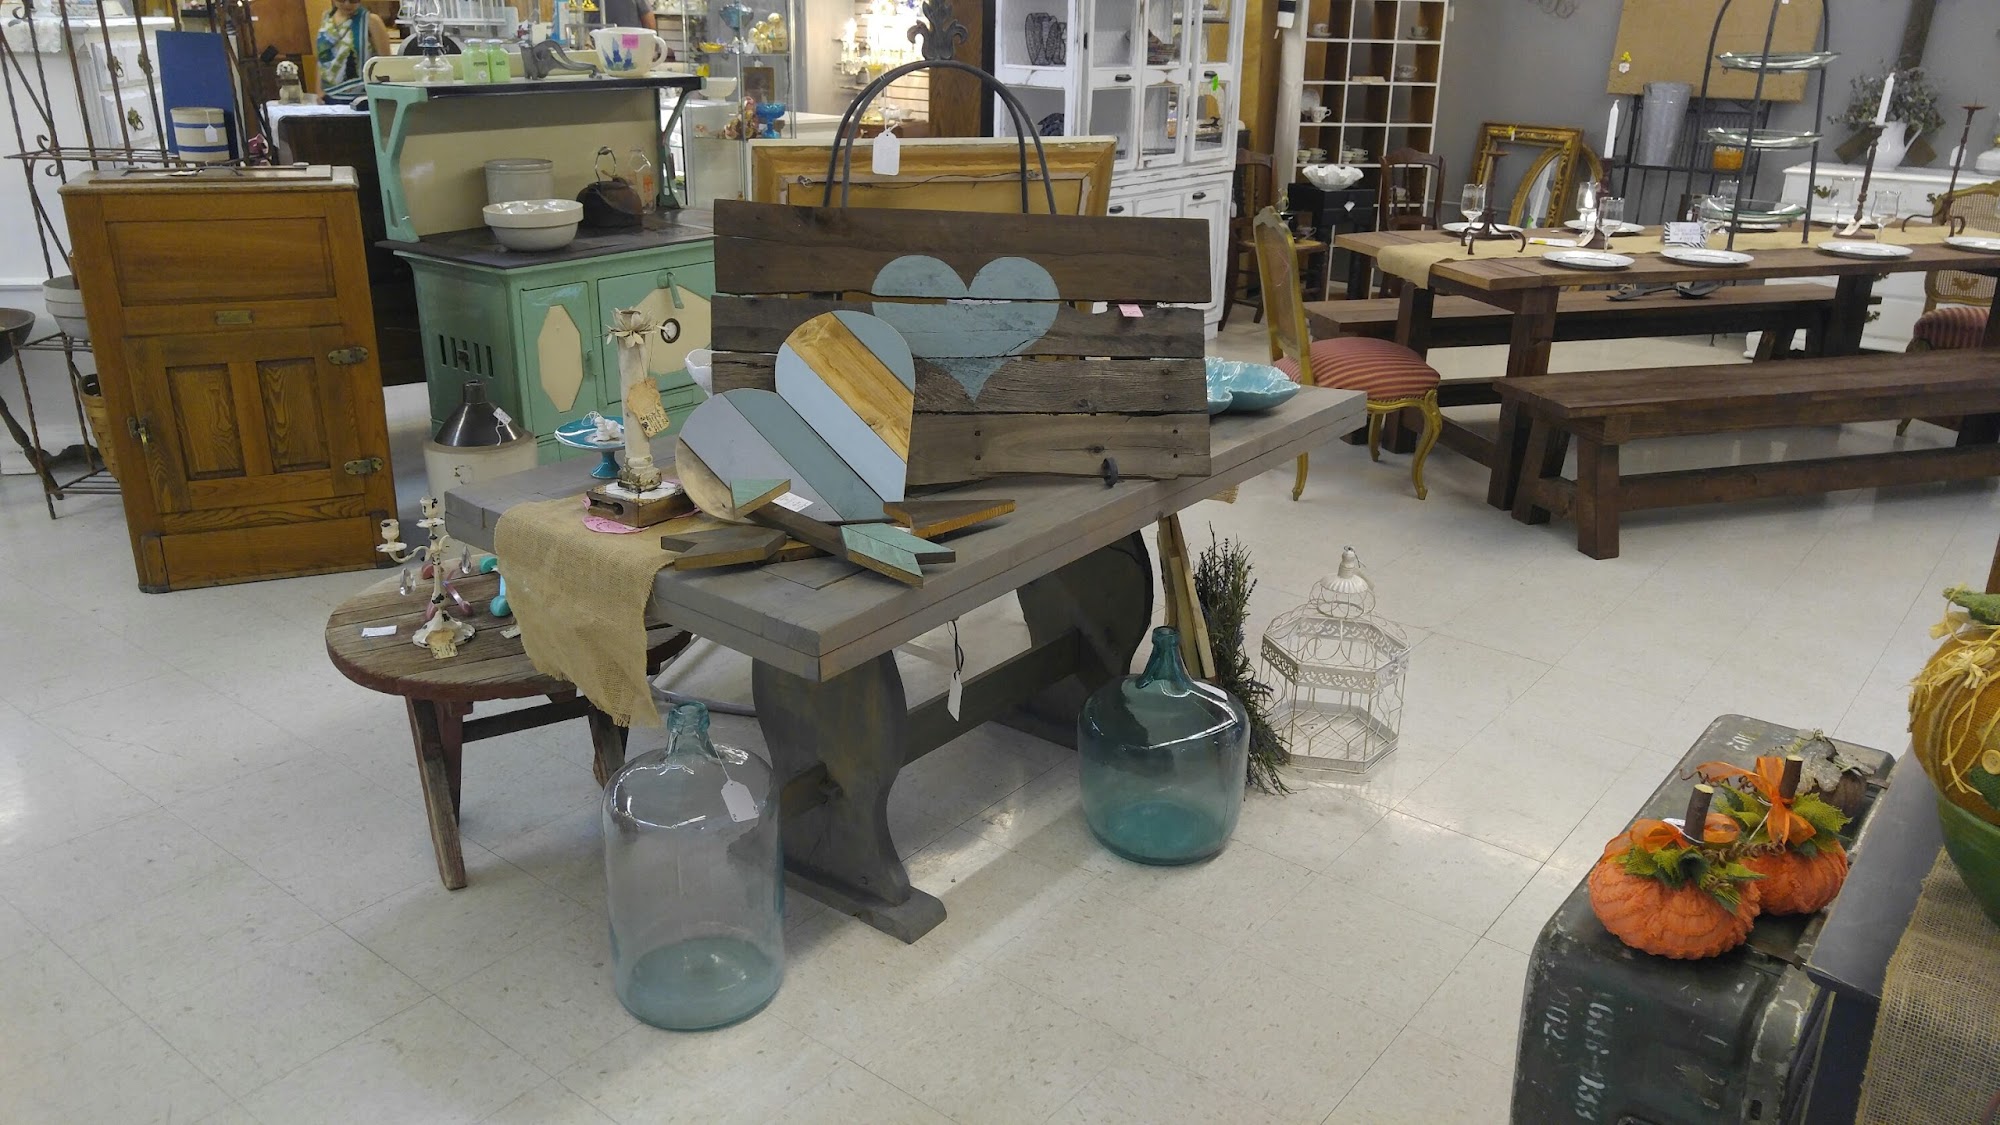 Catalina Antiques And Home Decor